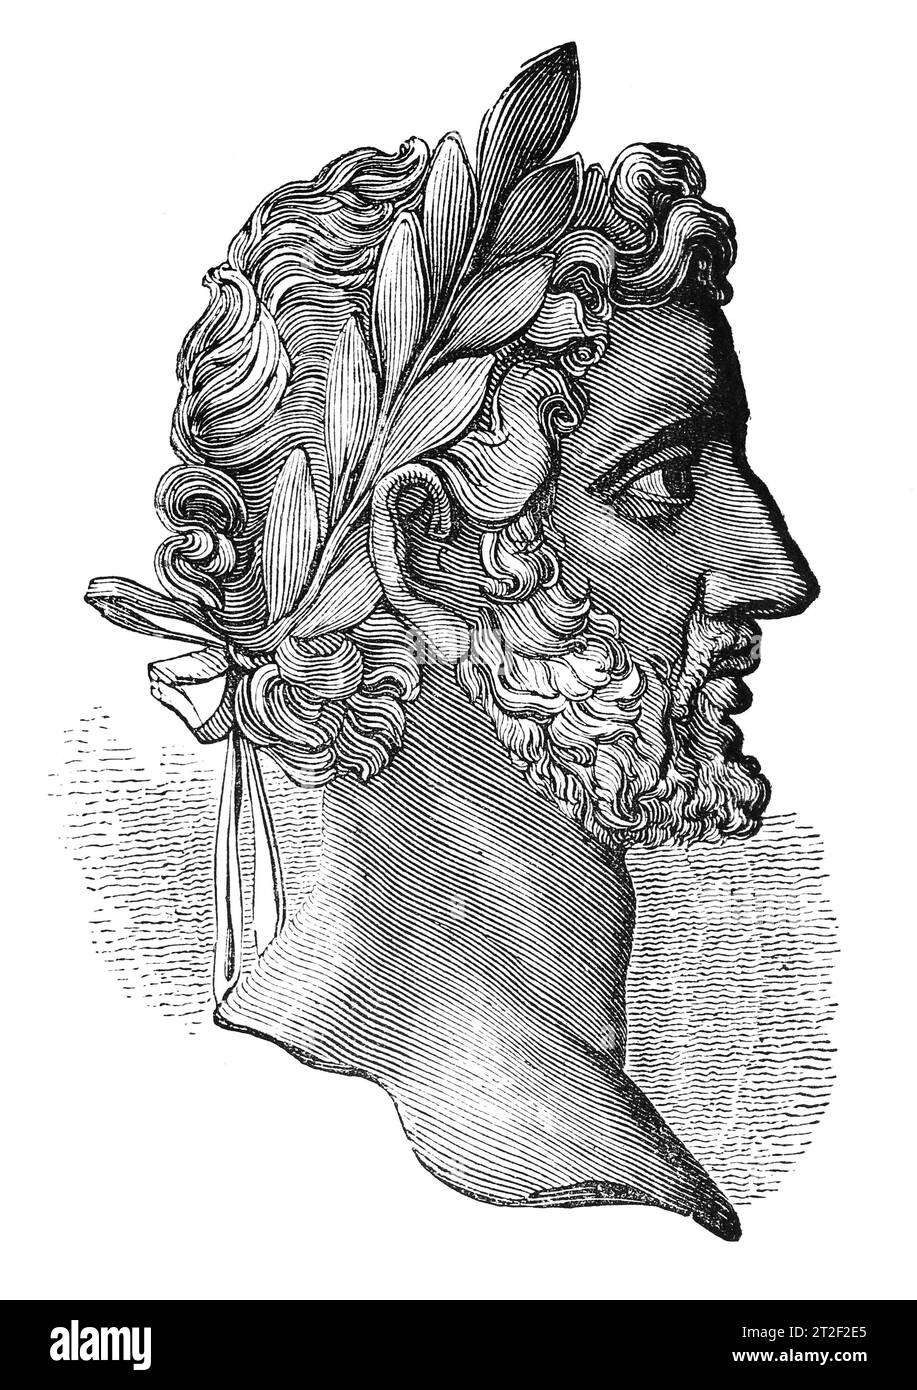 Titus Aelius Hadrianus Antoninus Pius, Roman Emperor from AD138 - 181. Profile portrait. Black and White Illustration from the 'Old England' published by James Sangster in 1860. Stock Photo